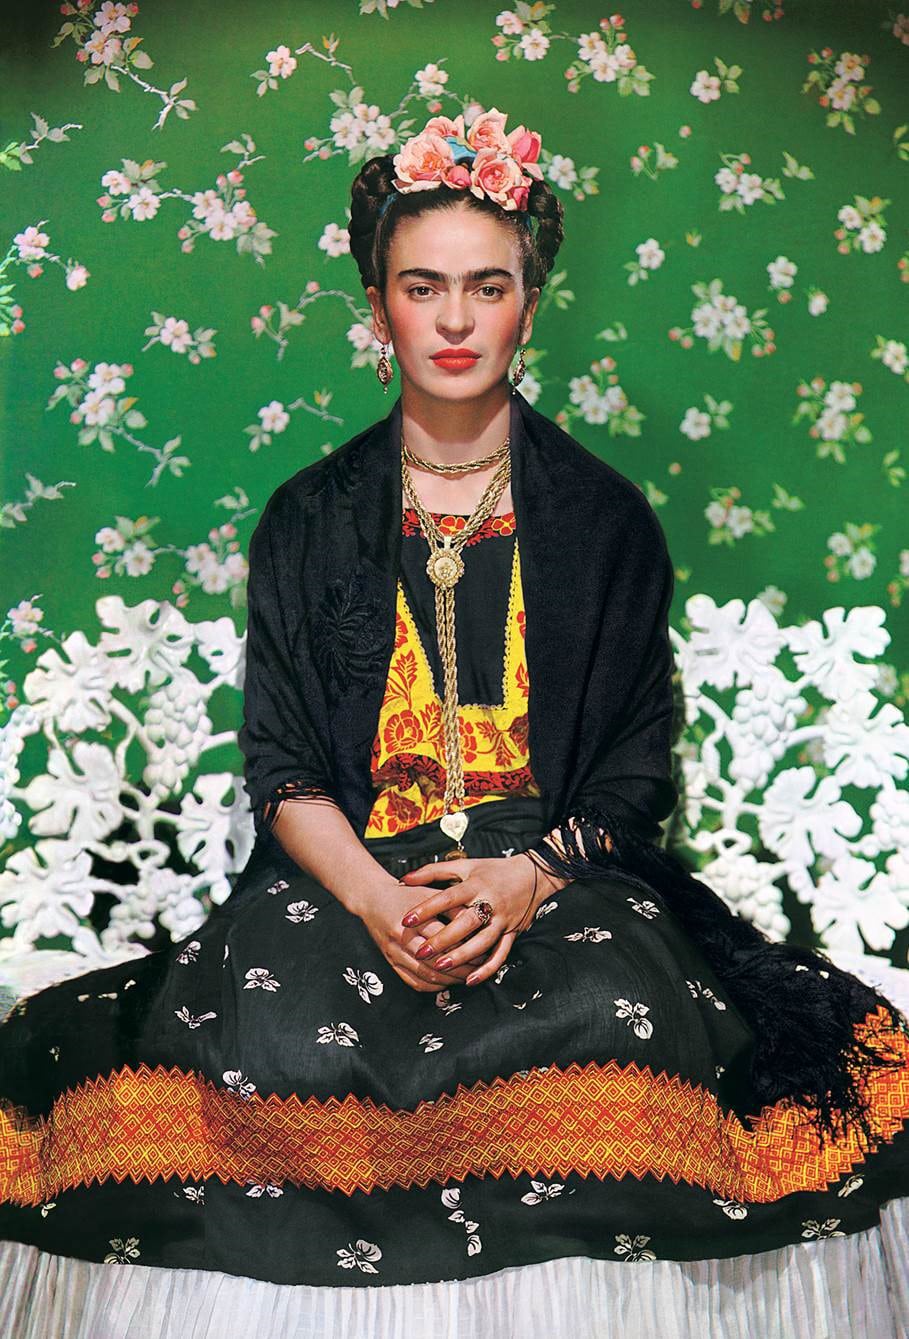 Frida Kahlo on White Bench, New York (2nd Edition) by Nickolas Muray